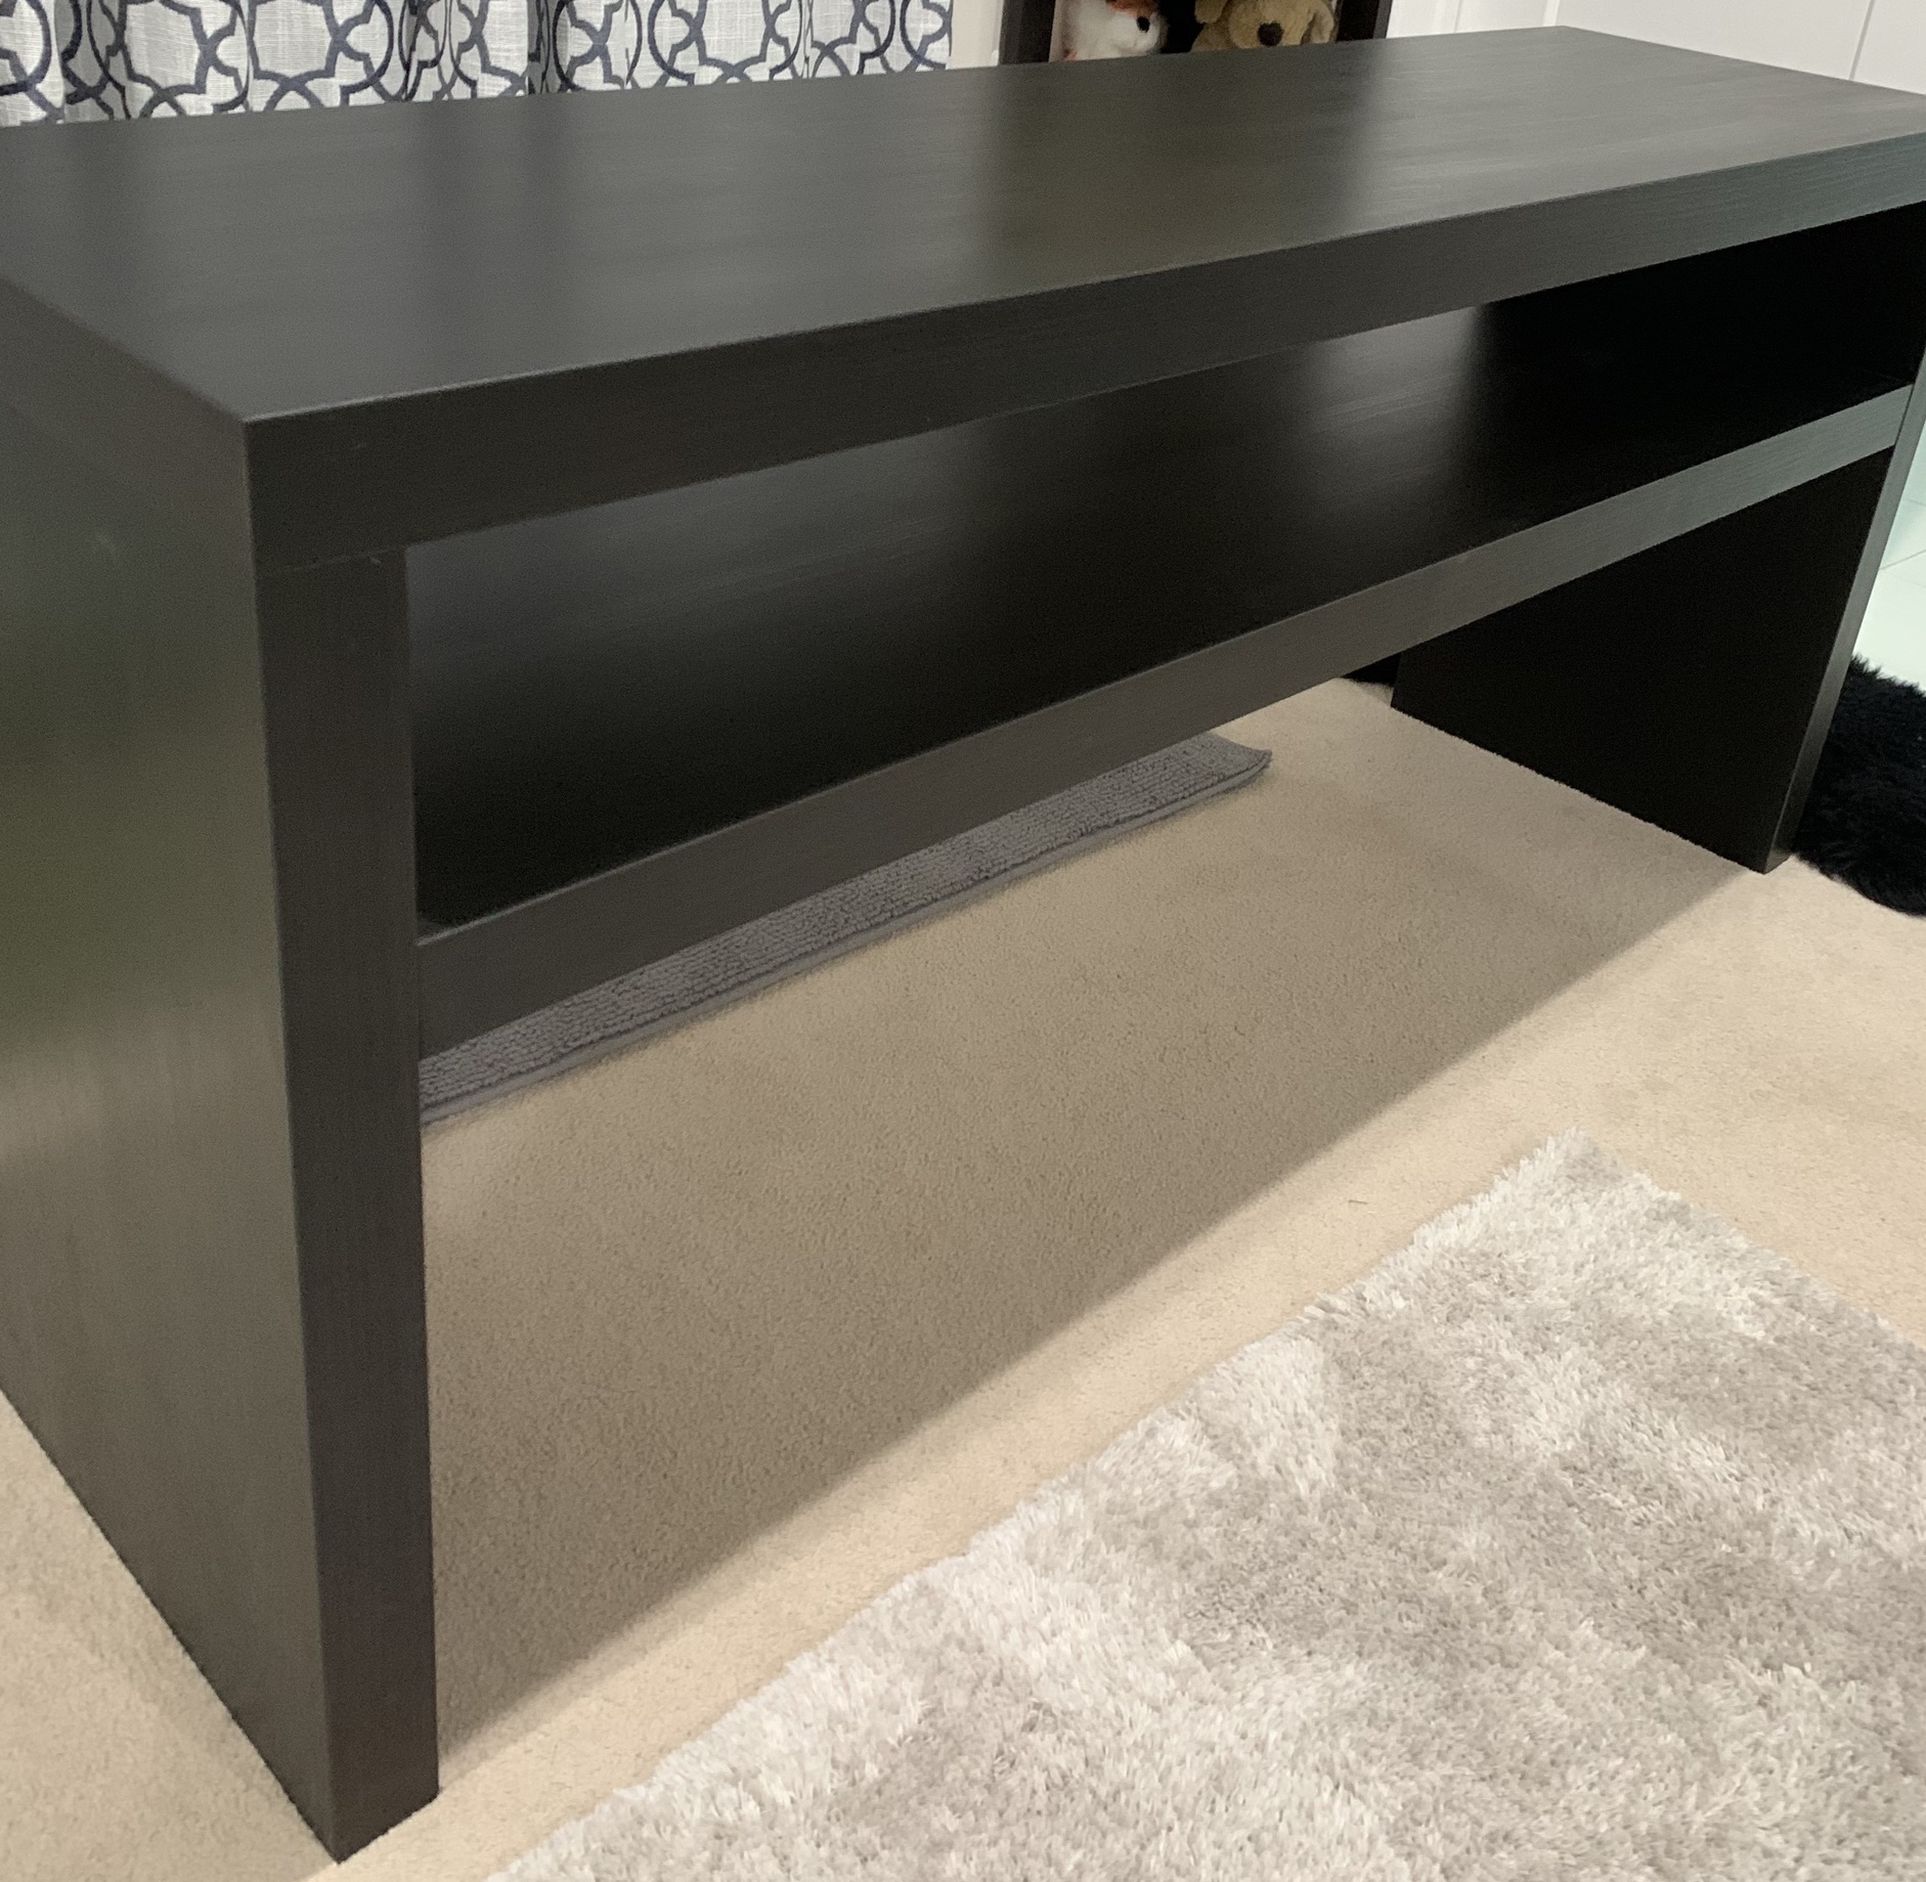 Barely used IKEA Lack console table